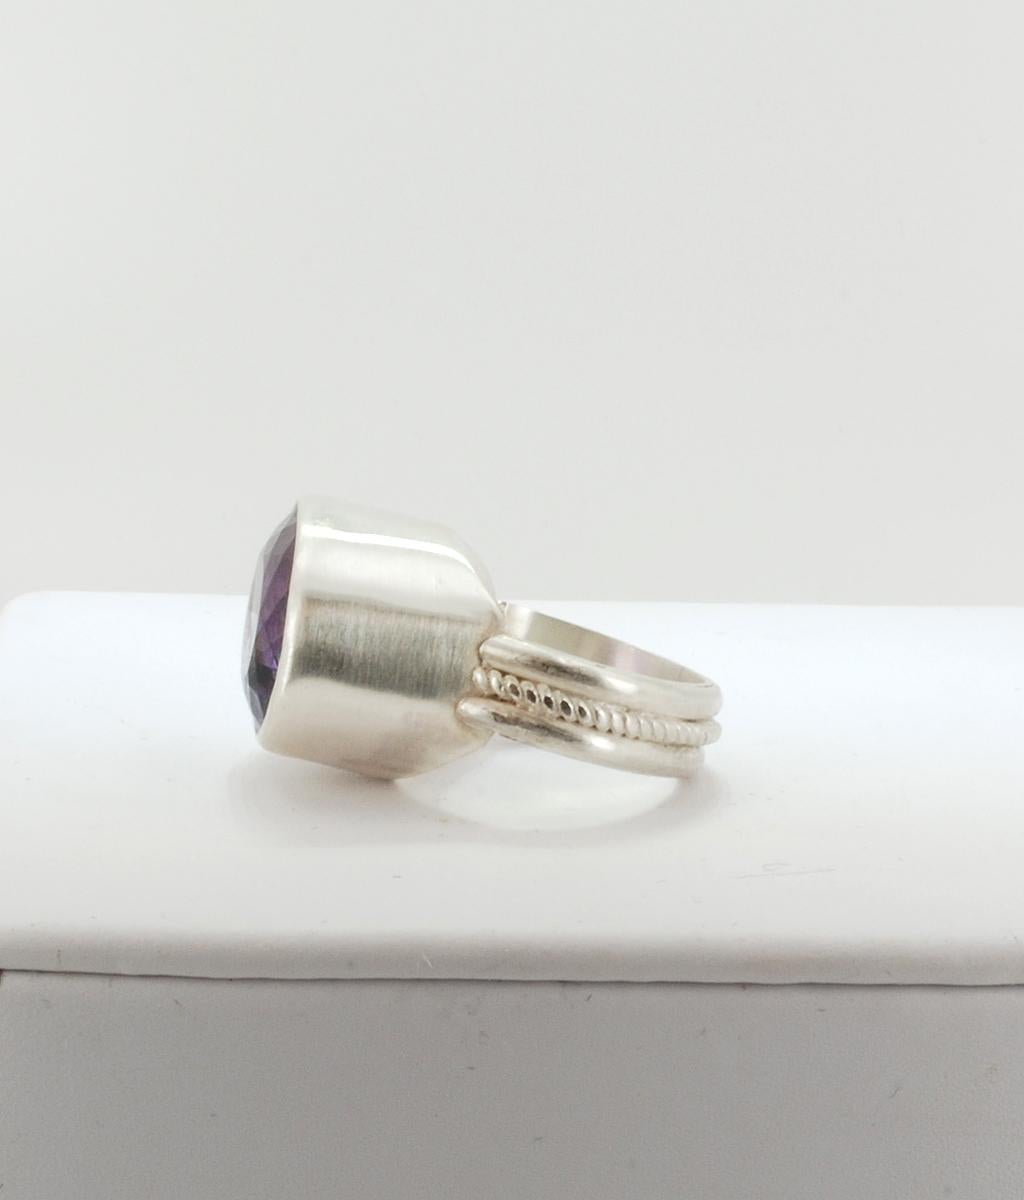 This ring is one-of-a-kind with a large oval deep purple 13.59 carat amethyst (1/2